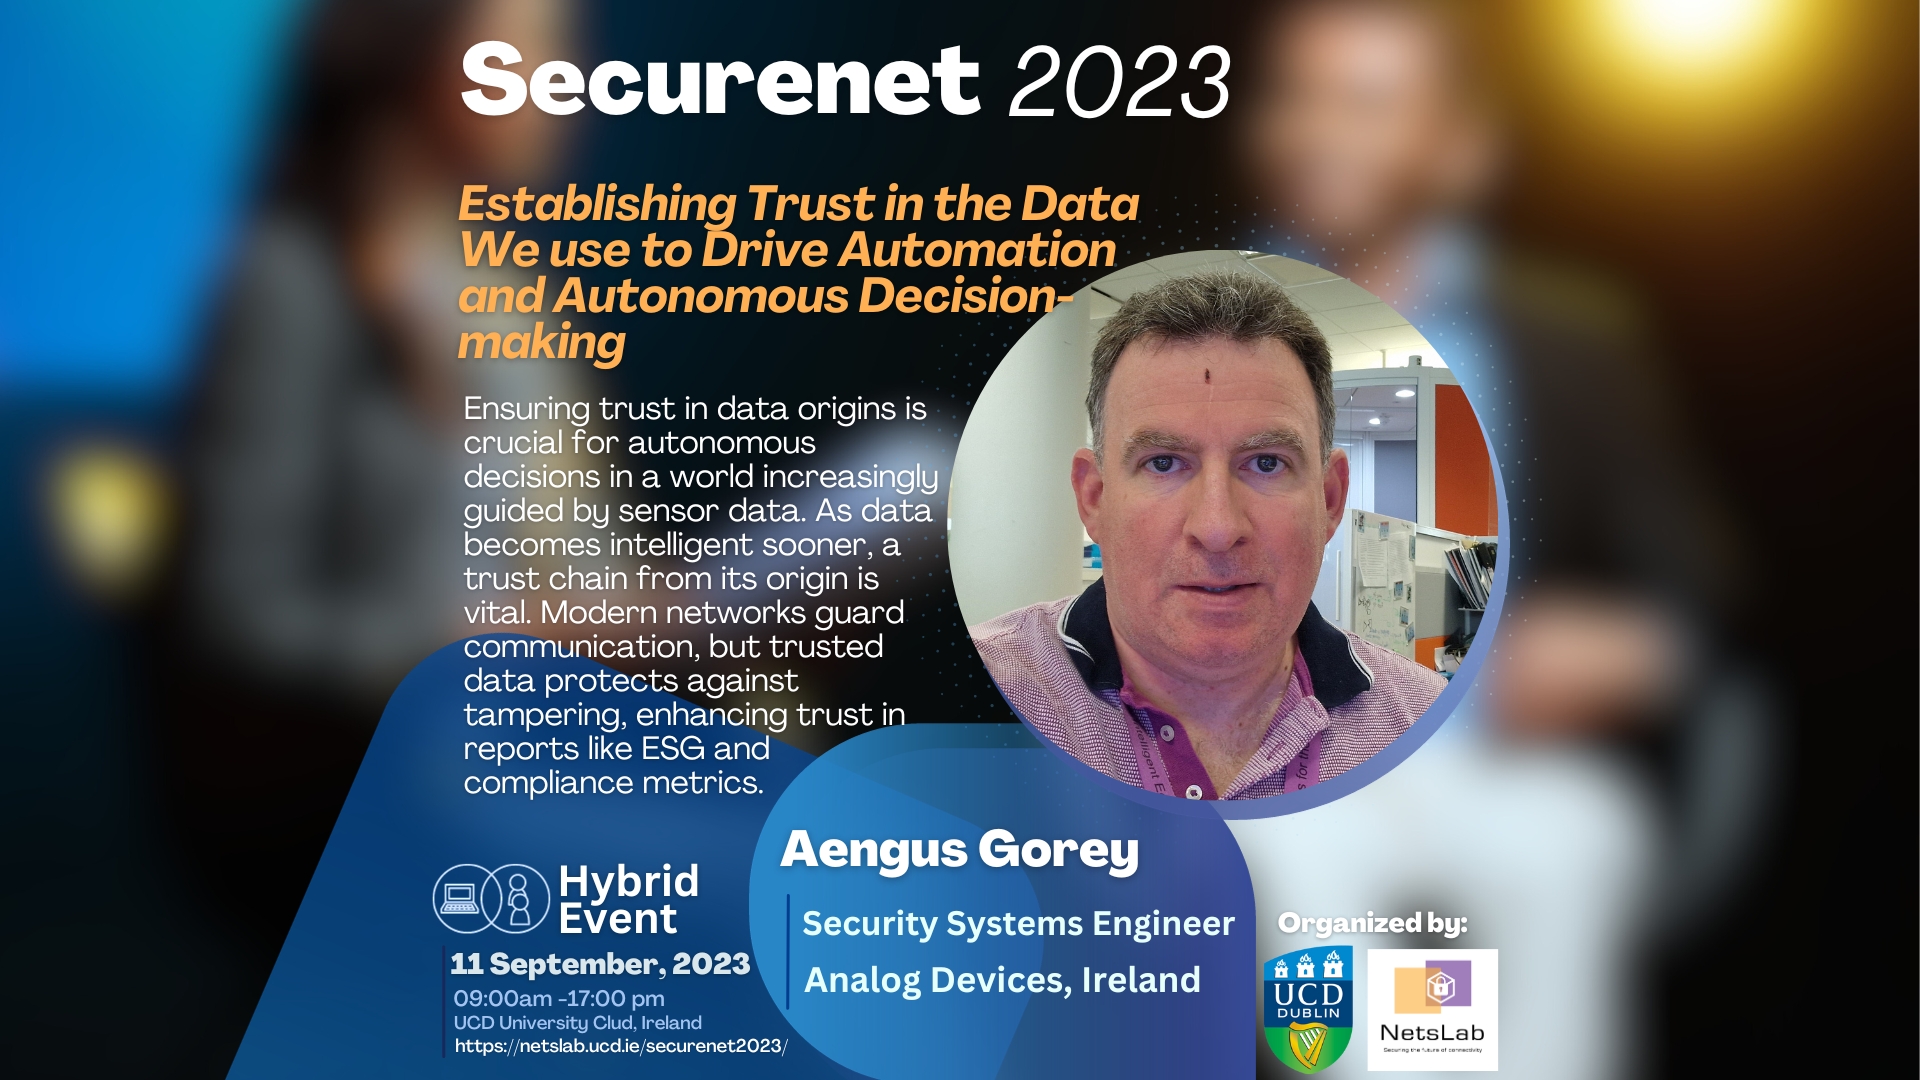 SECURENET 2023 - Establishing Trust in the Data we use to Drive Automation - Aengus Gorey